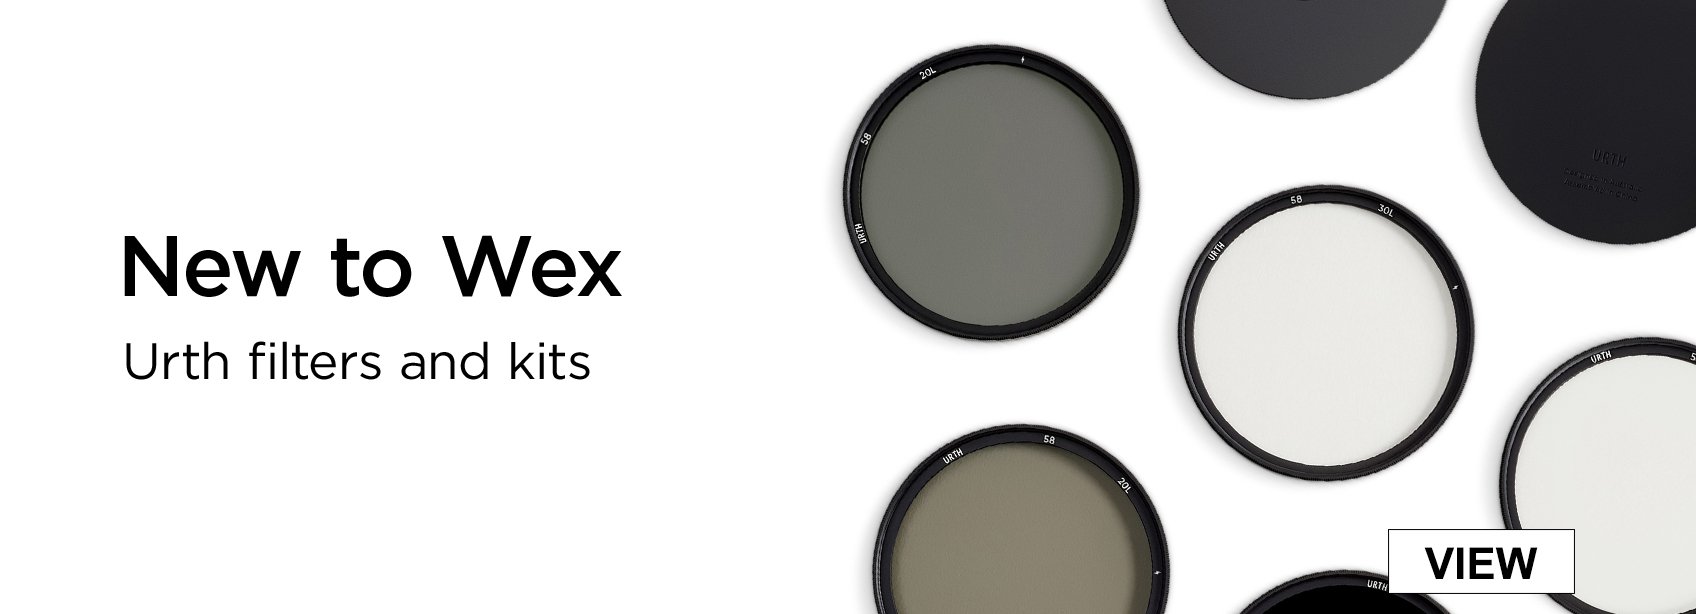 New to Wex - Urth filters and kits